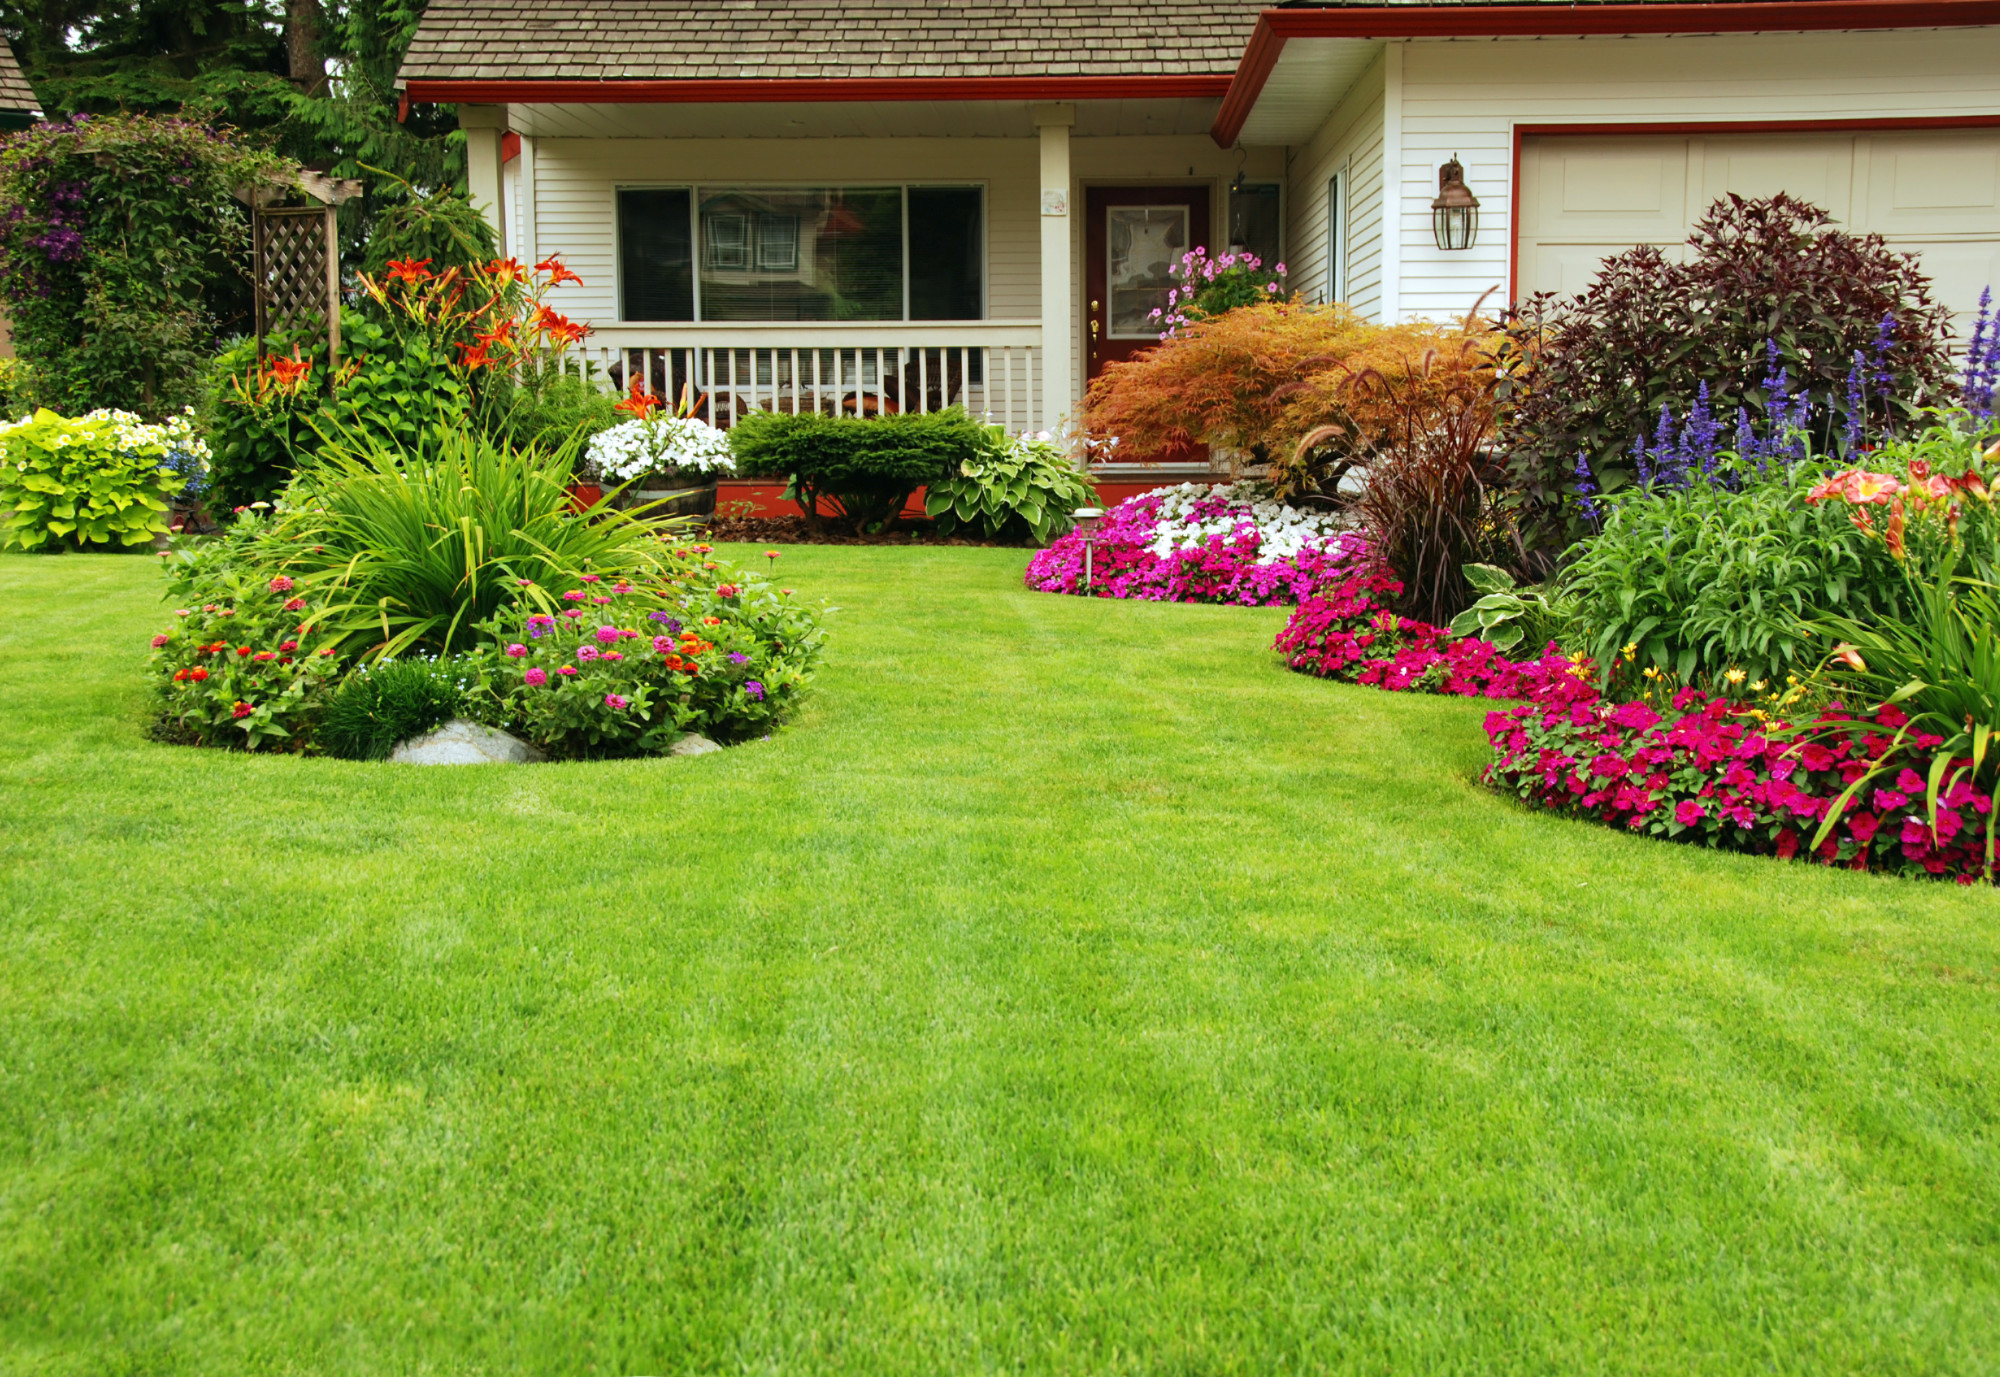 Best Lawn on the Block: This Is How to Make Grass Greener